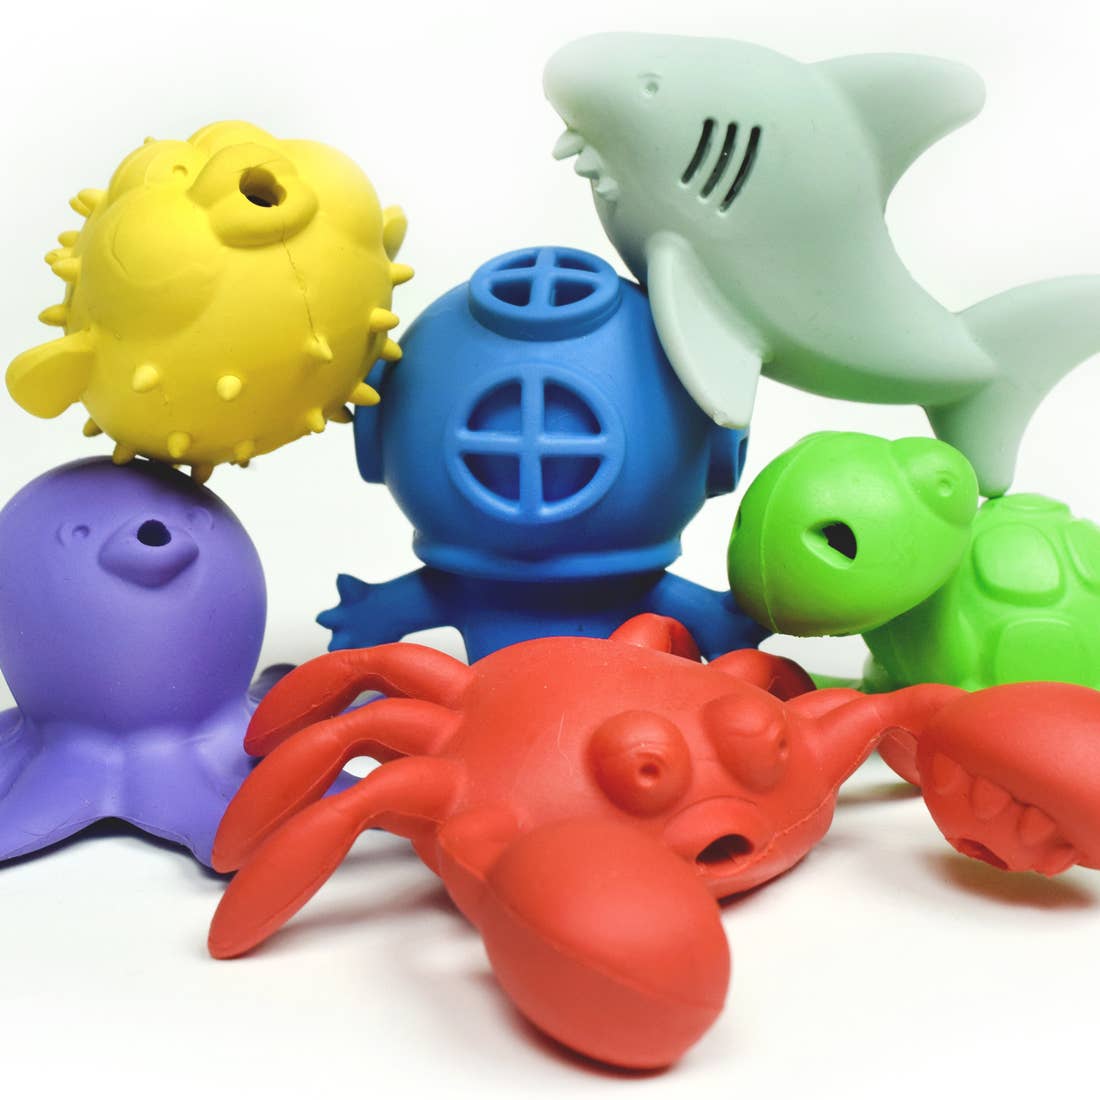 All-Natural Rubber Bath Toys – The Green Tap